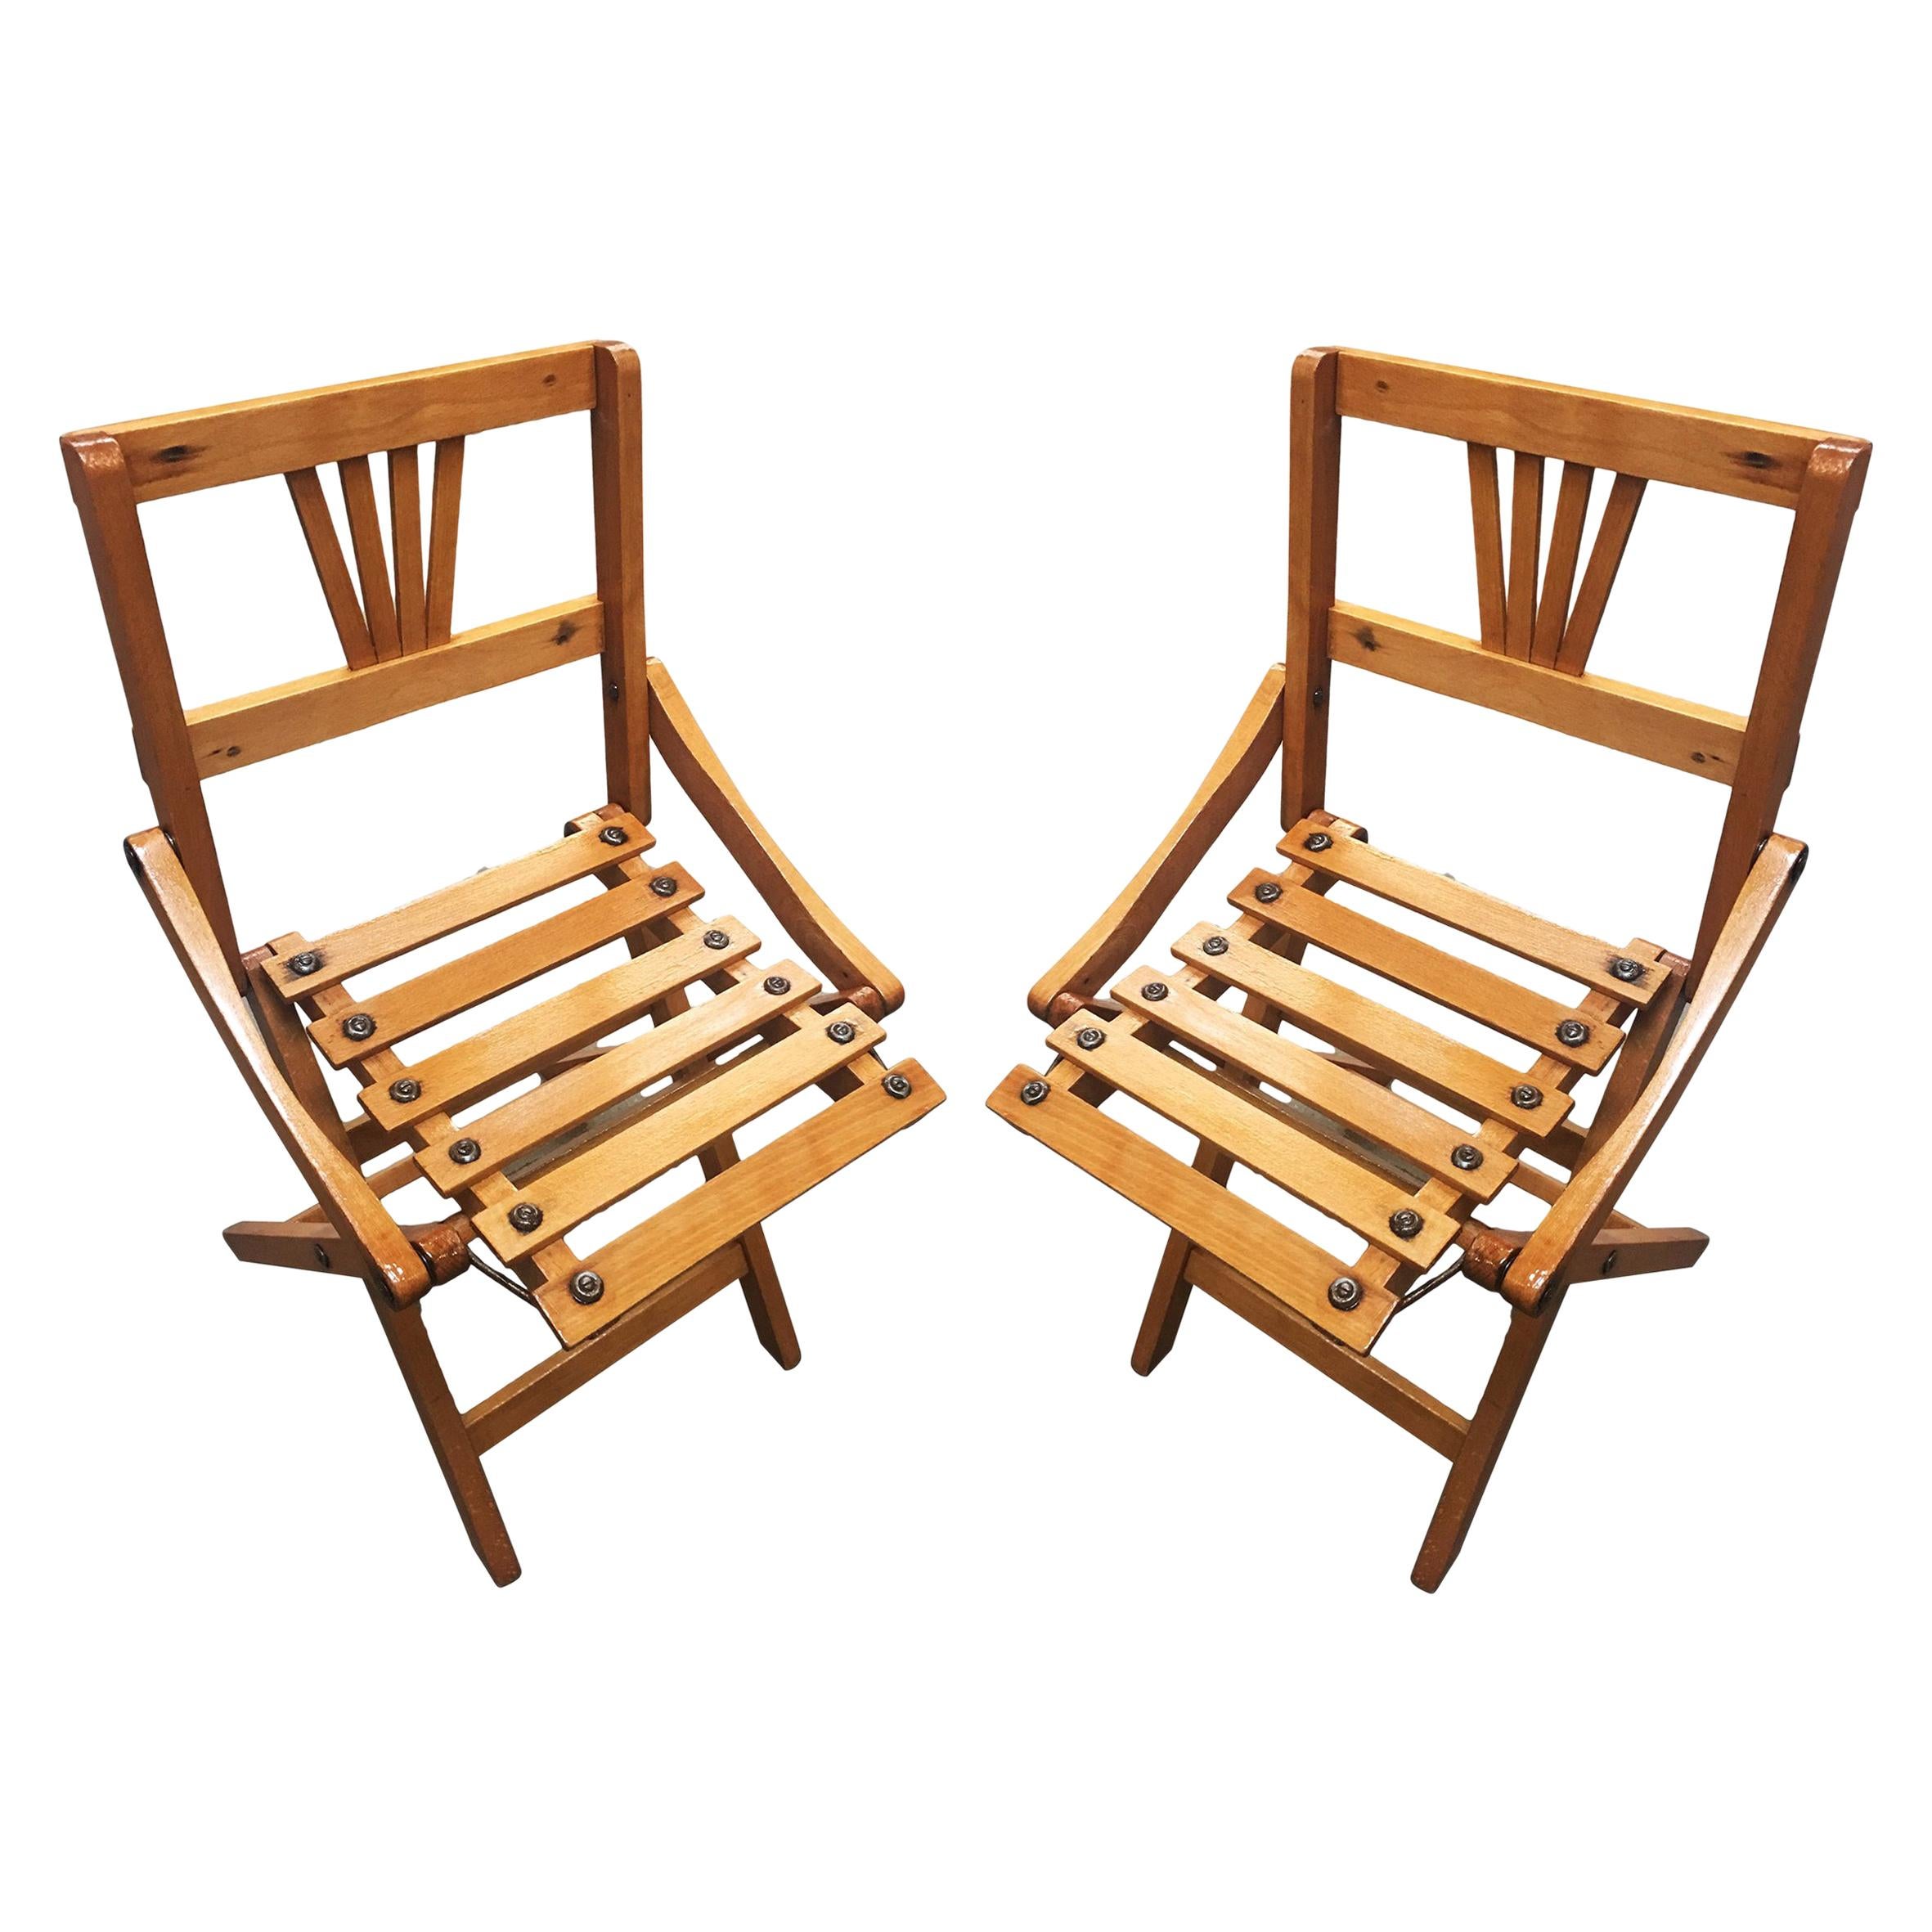 Pair of George Nelson Inspired Child-Size Slat Folding Chair For Sale